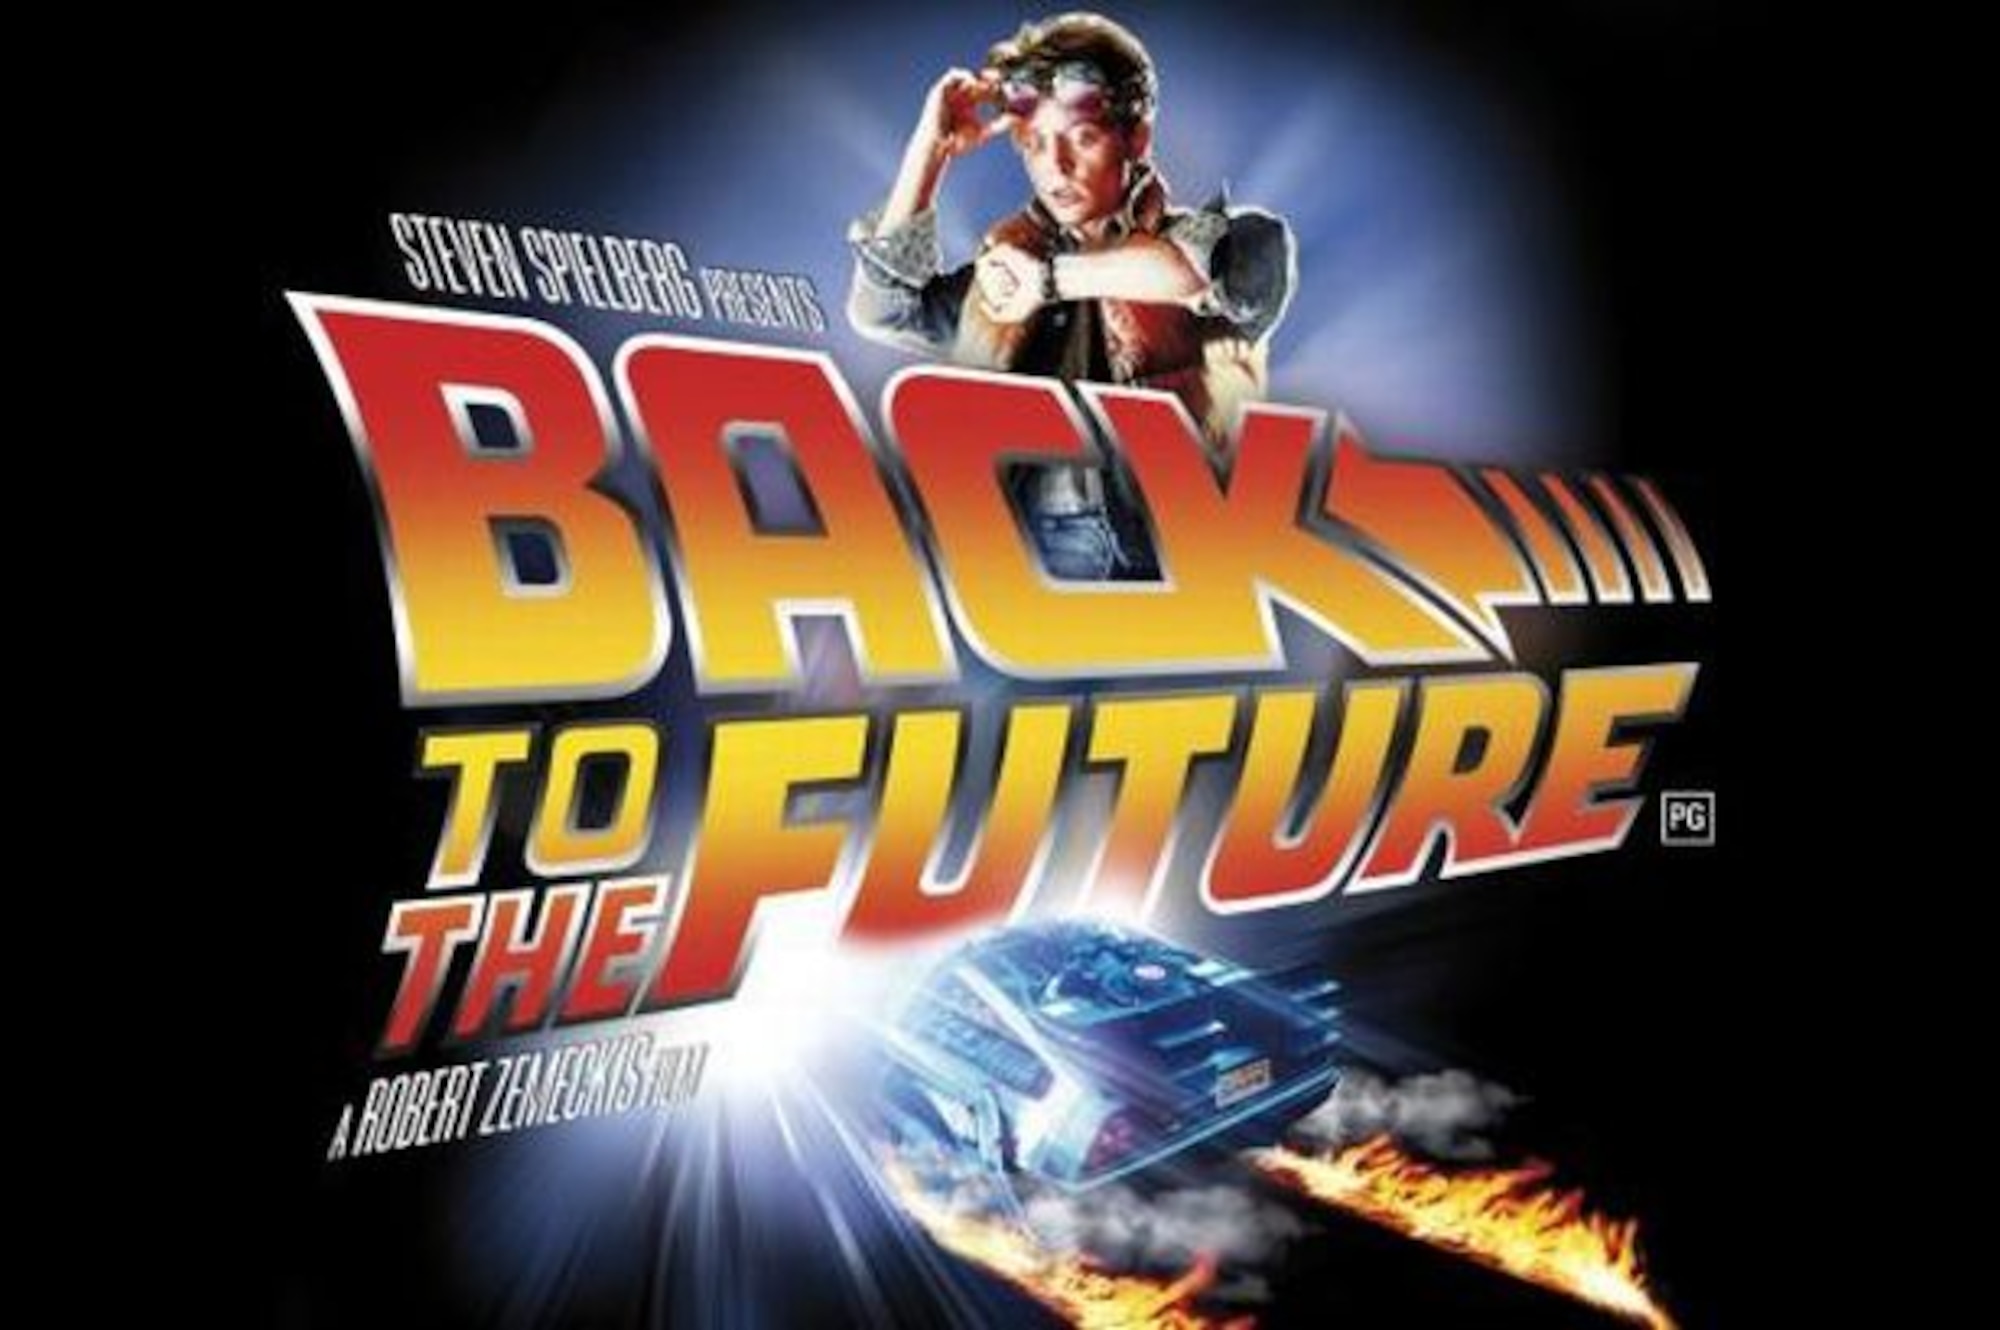 The Air Force Museum Theatre will show "Back to the Future" at 4 p.m. on Jan. 24, 2016, as part of its Hollywood Series, sponsored by Cassano's Pizza King.